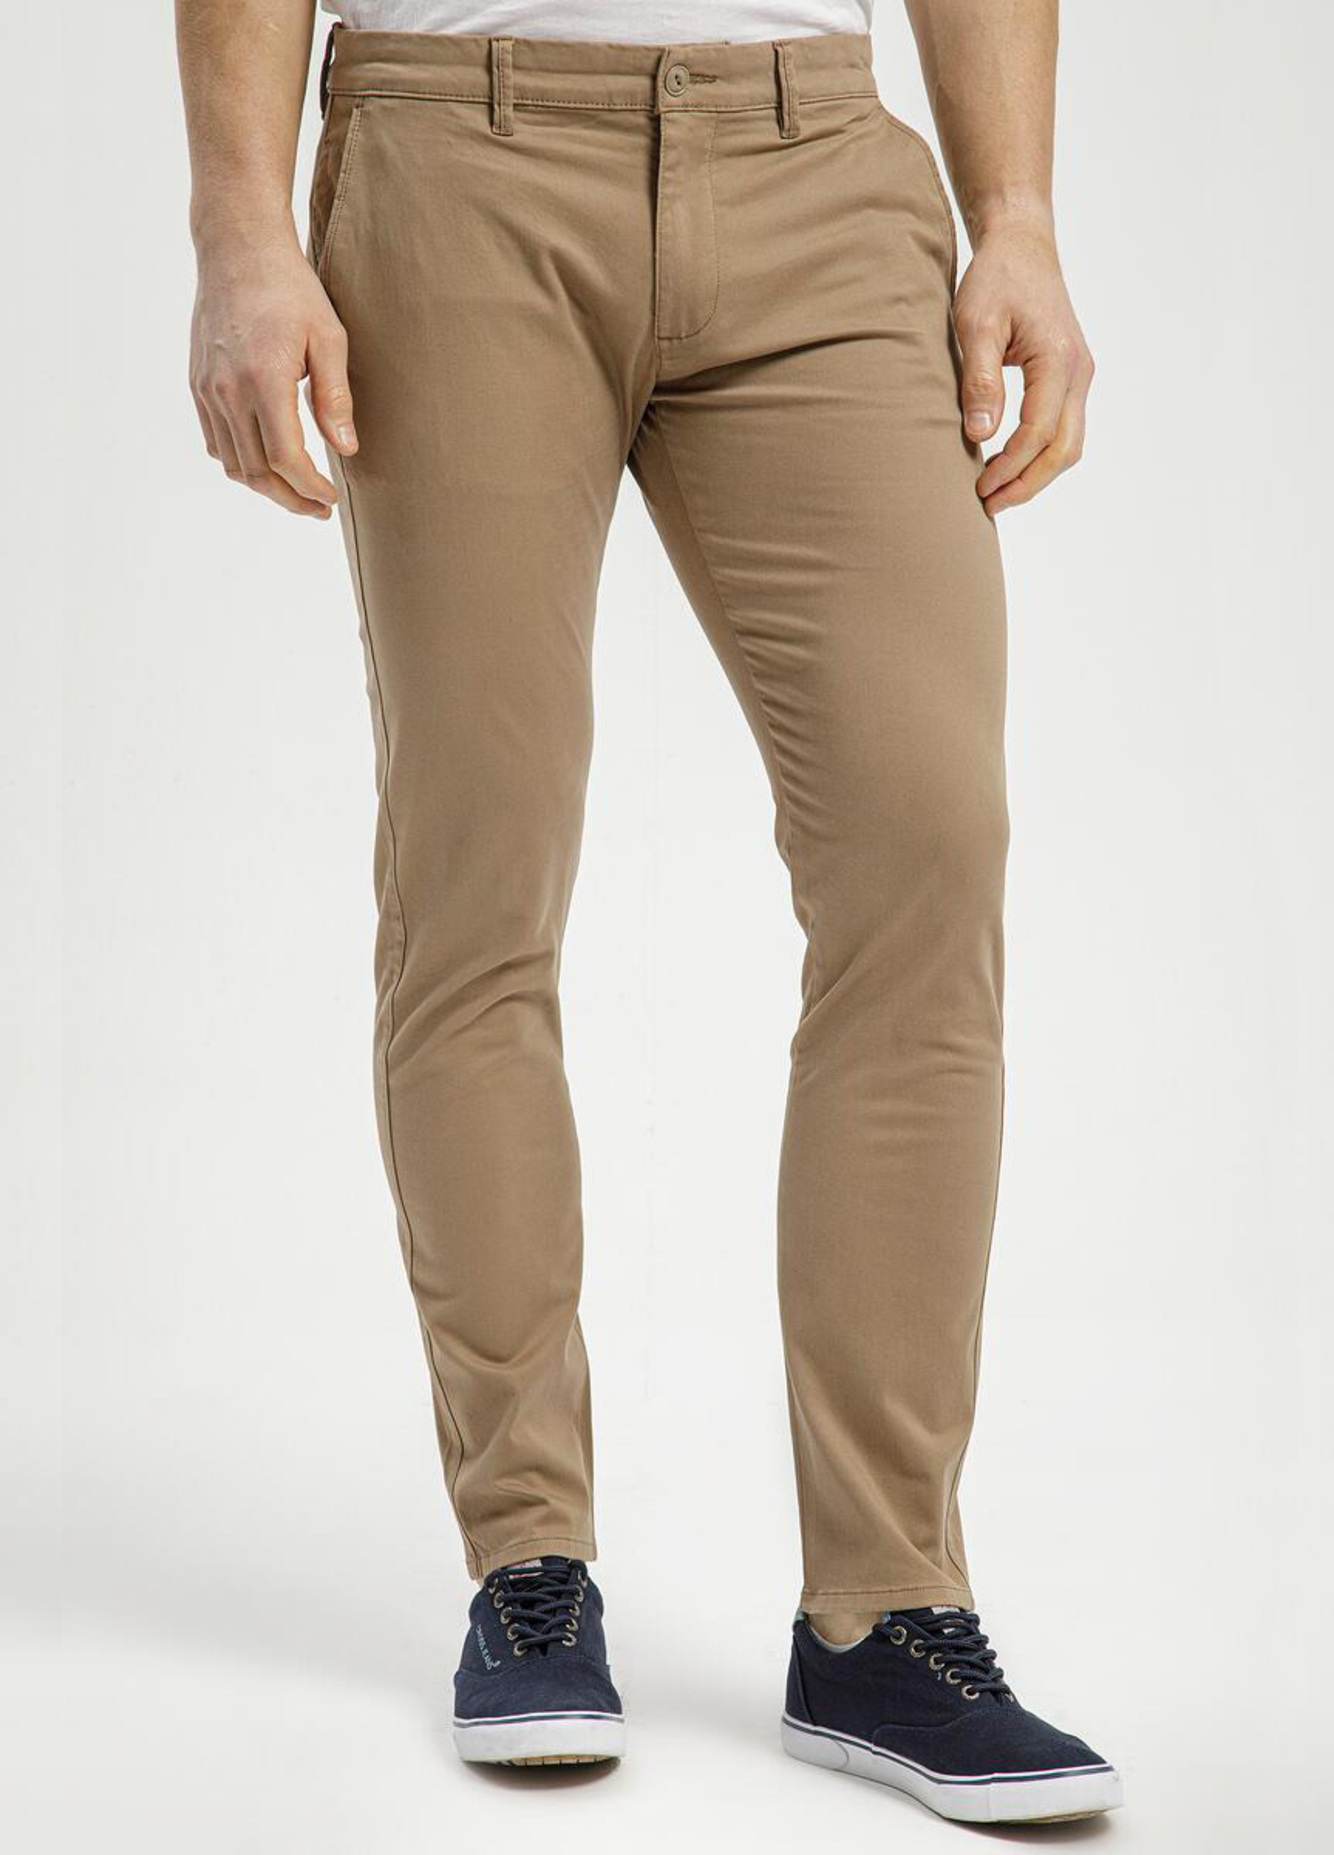 Cross Jeans Chino Tapered Fit Beige 165 - E-120-169